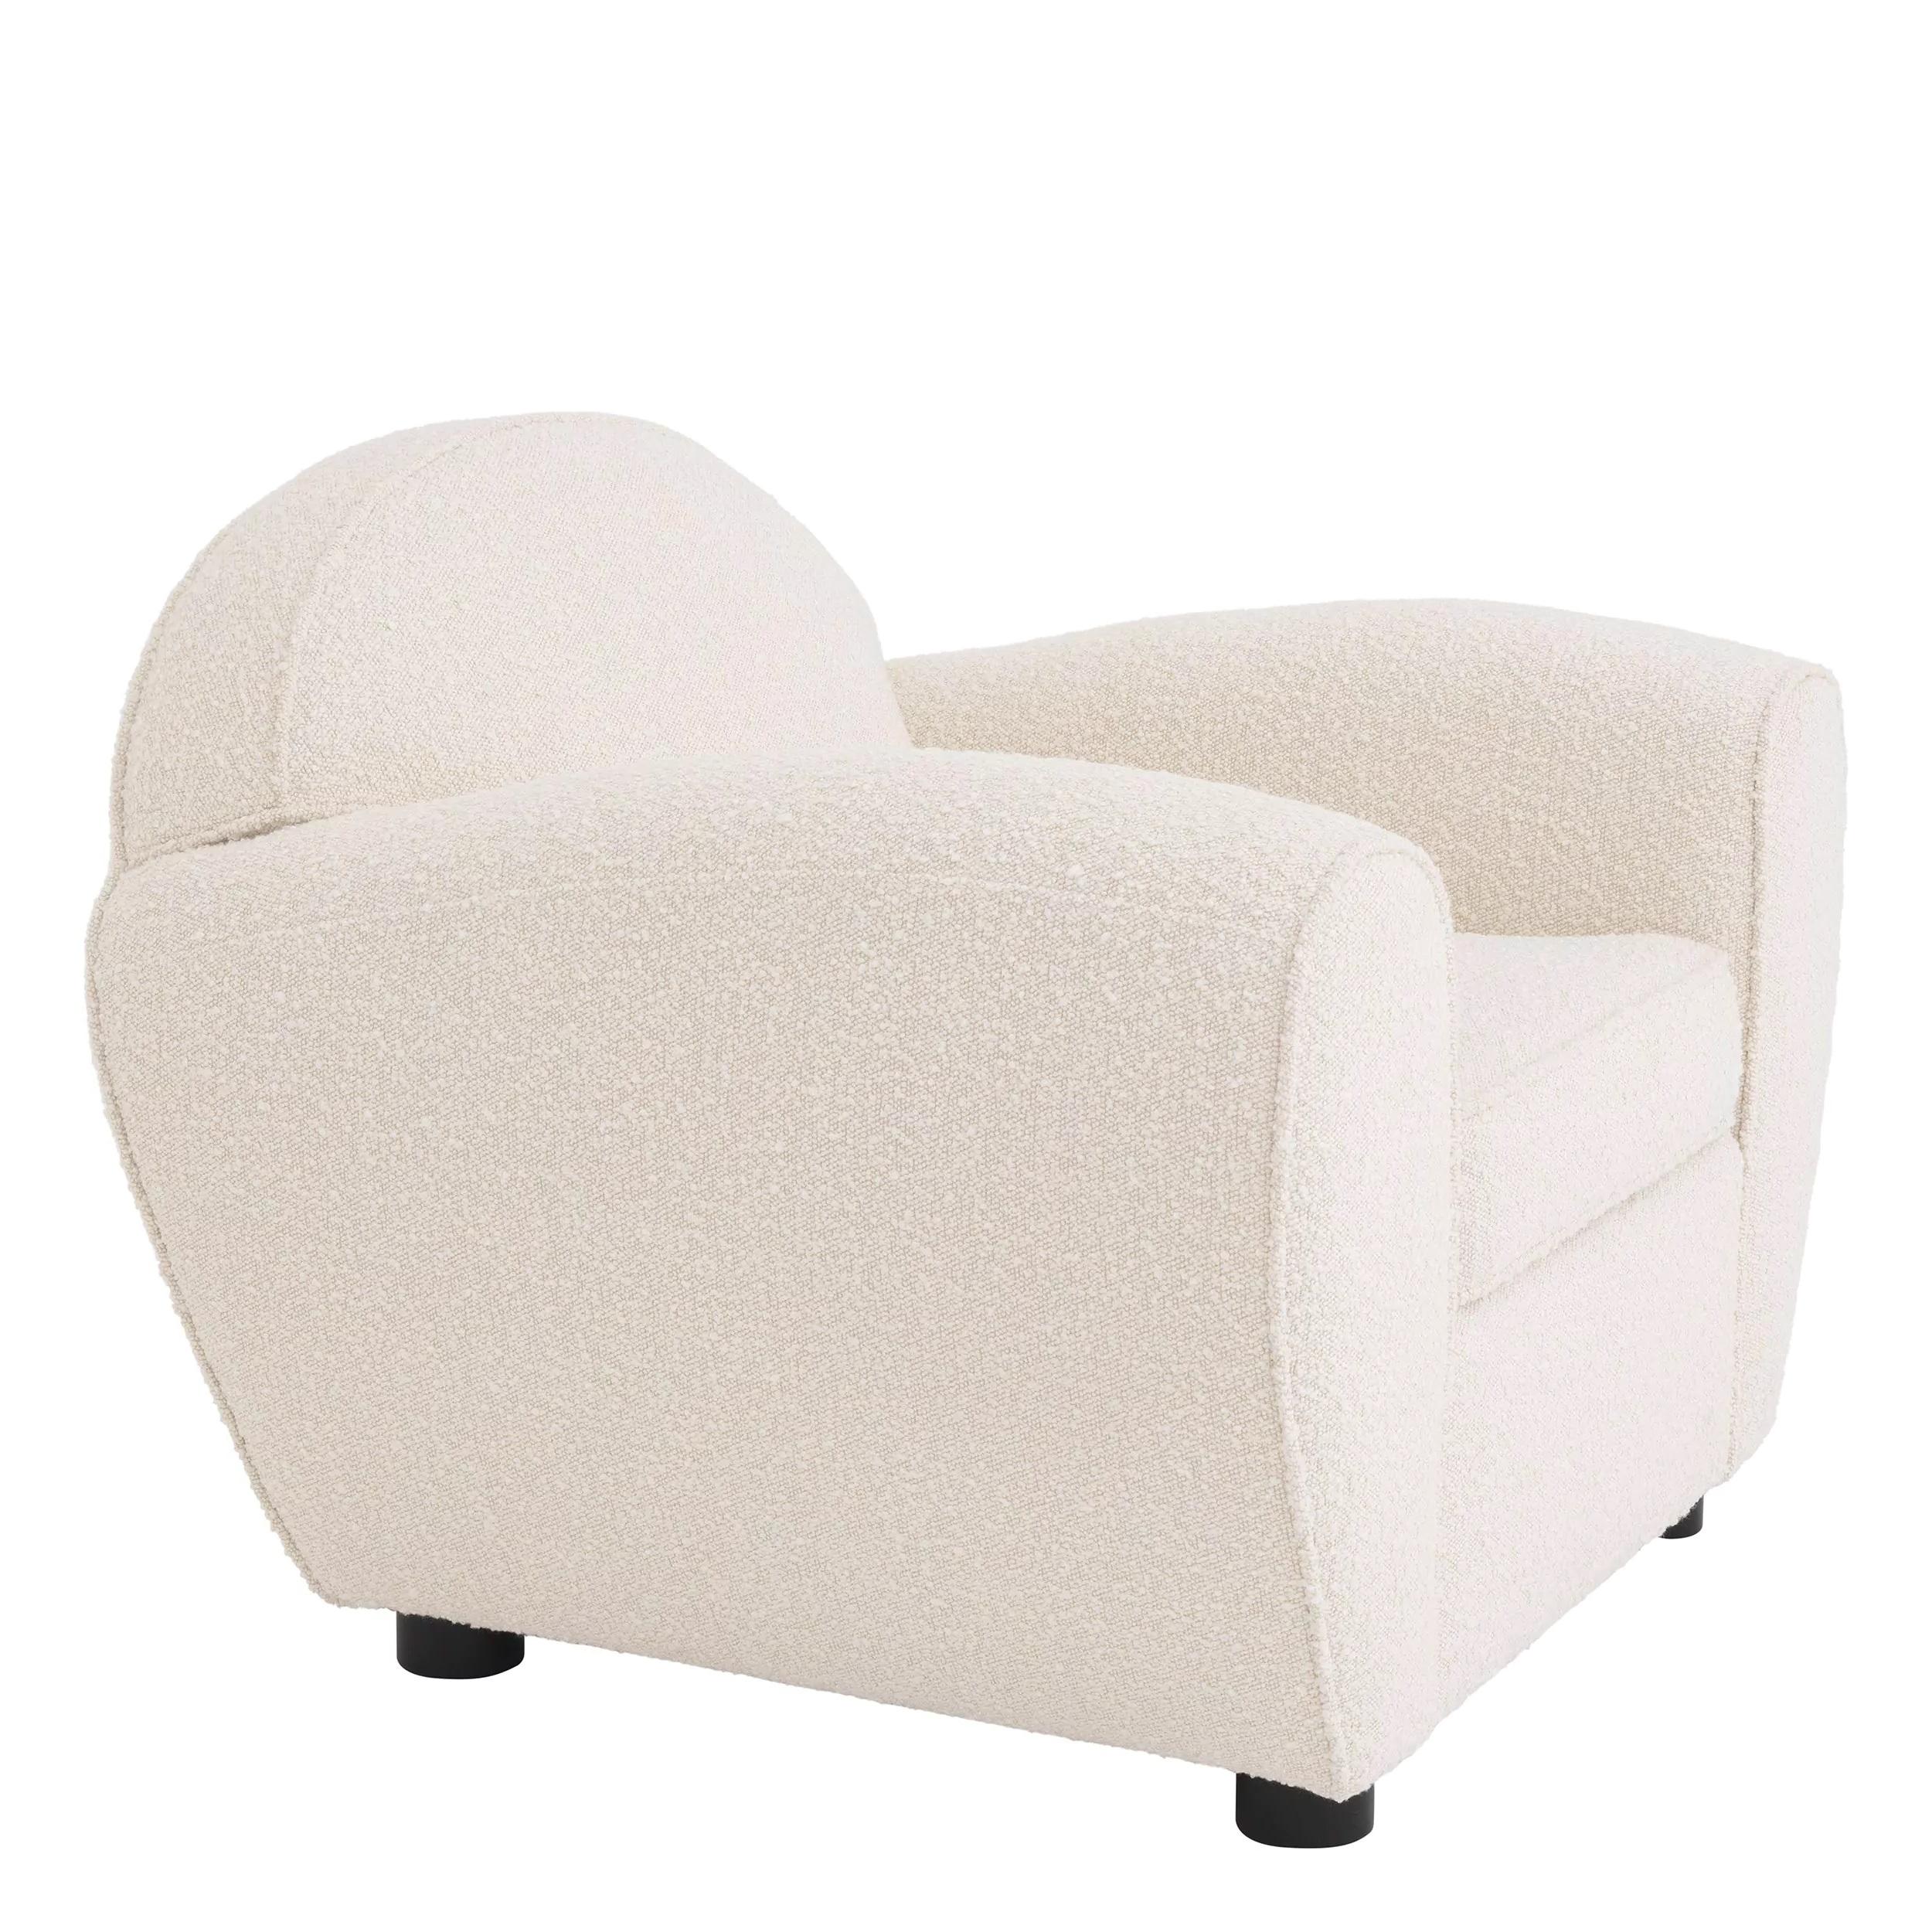 French Design And Art Deco style beige bouclé fabric and black wooden feet rounded curved and comfy club chair.